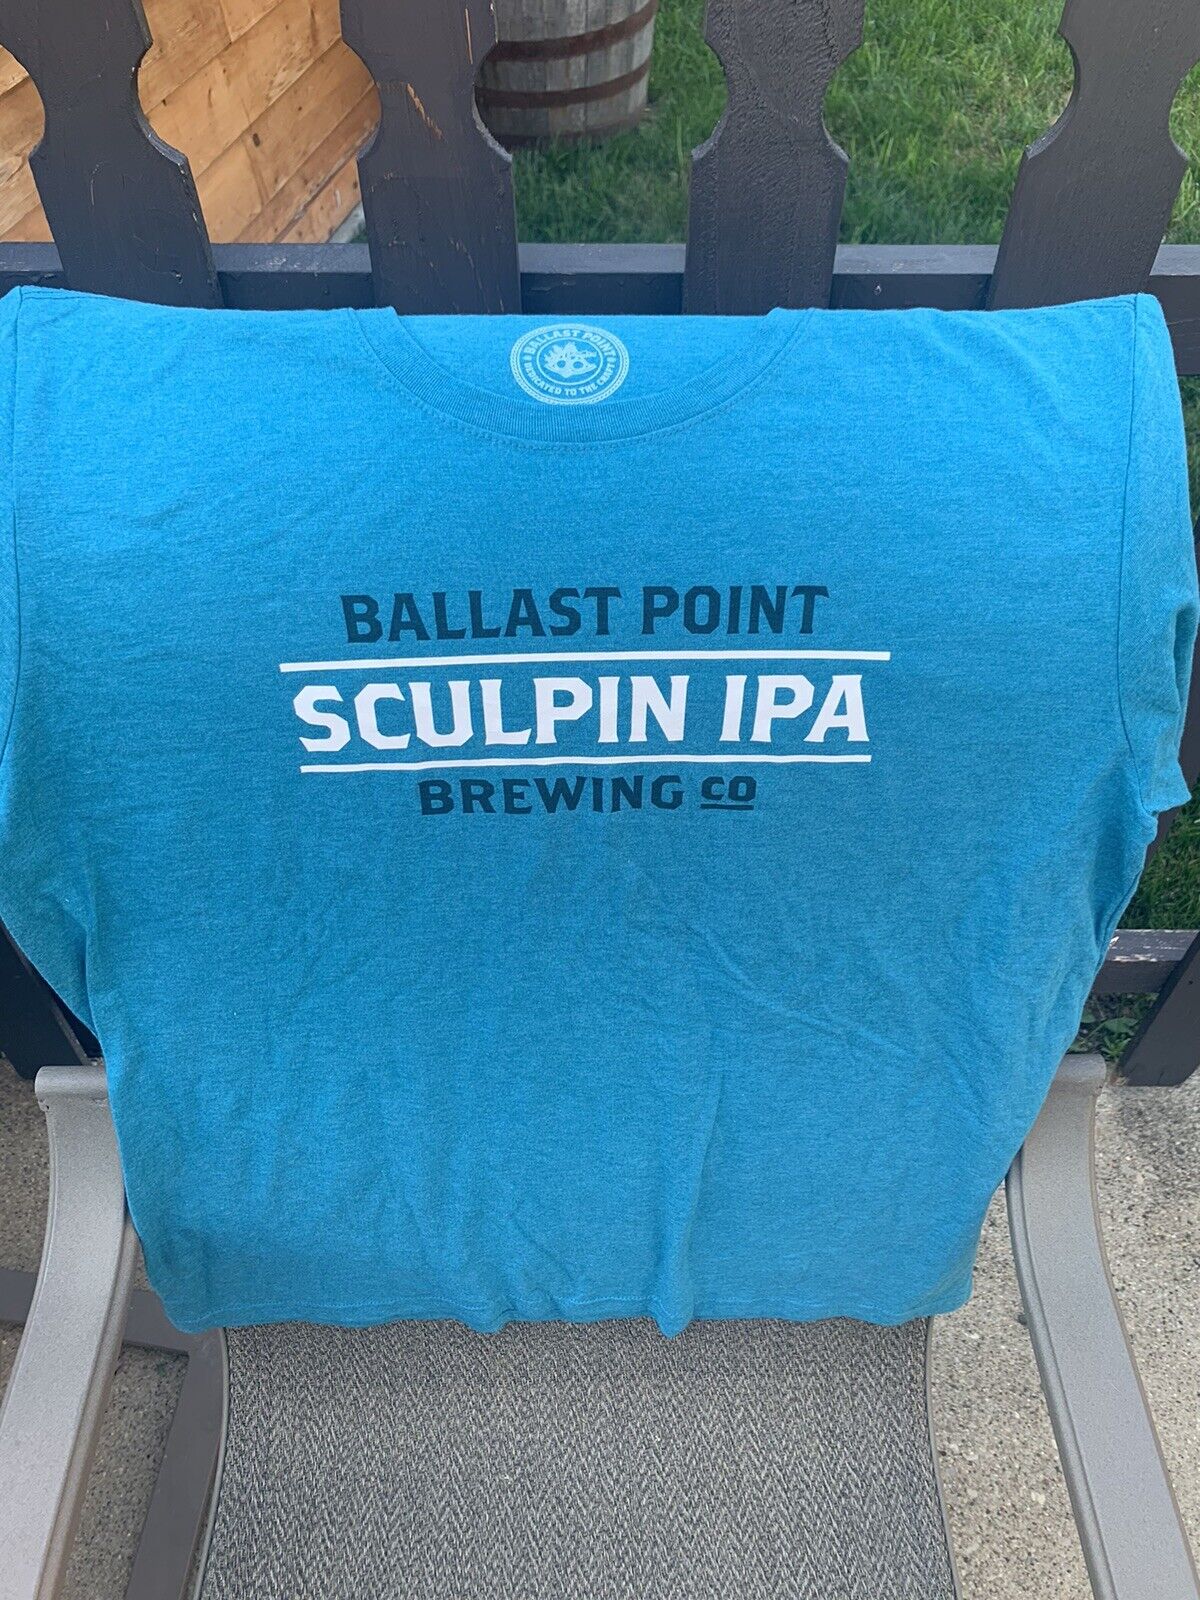 2 FOR 1 BRAND NEW Ballast Point Brewing Co. Sculpin IPA Beer T-Shirt - Large